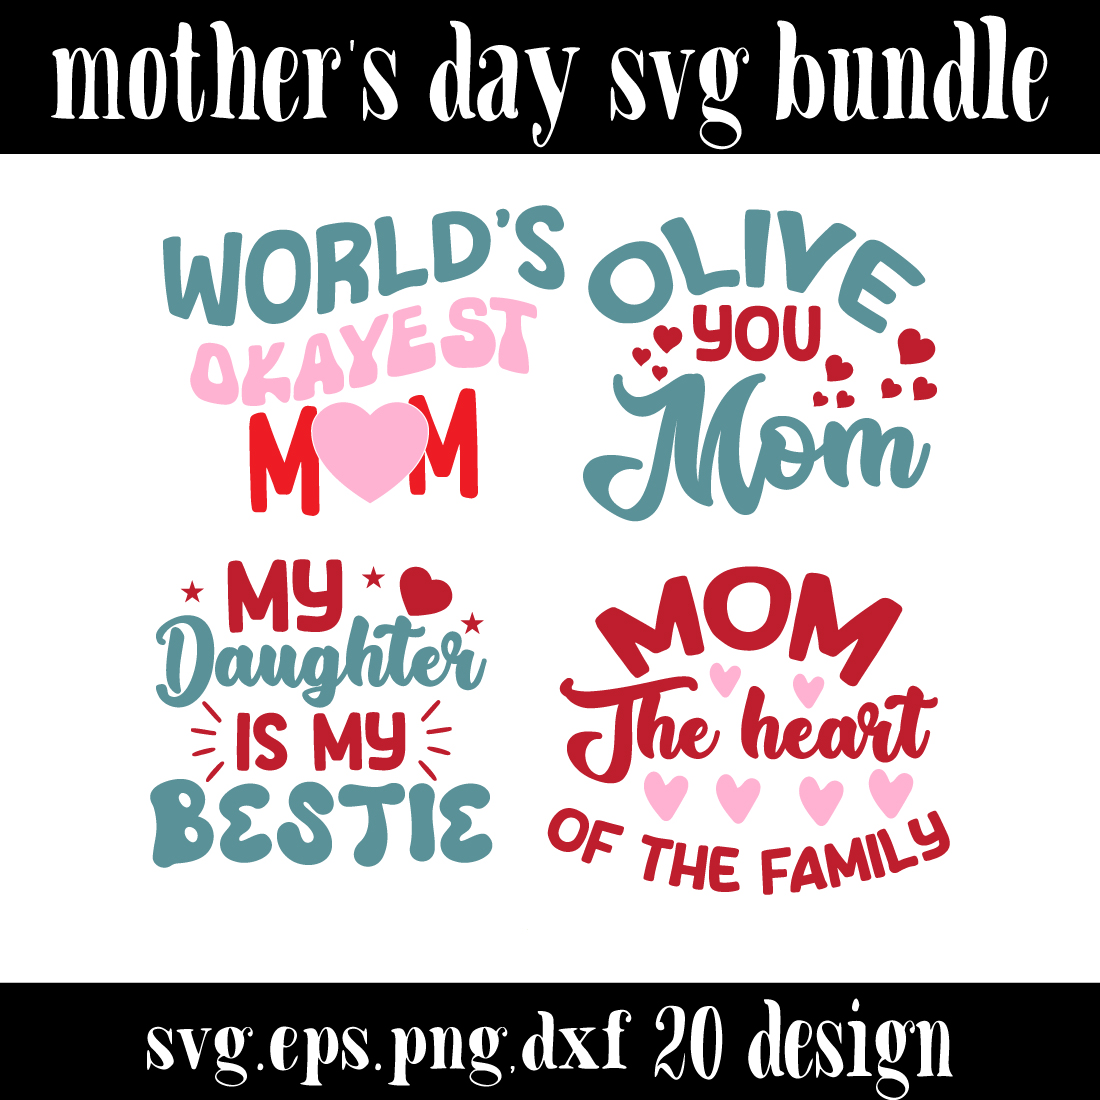 mother's day svg bundle preview image.